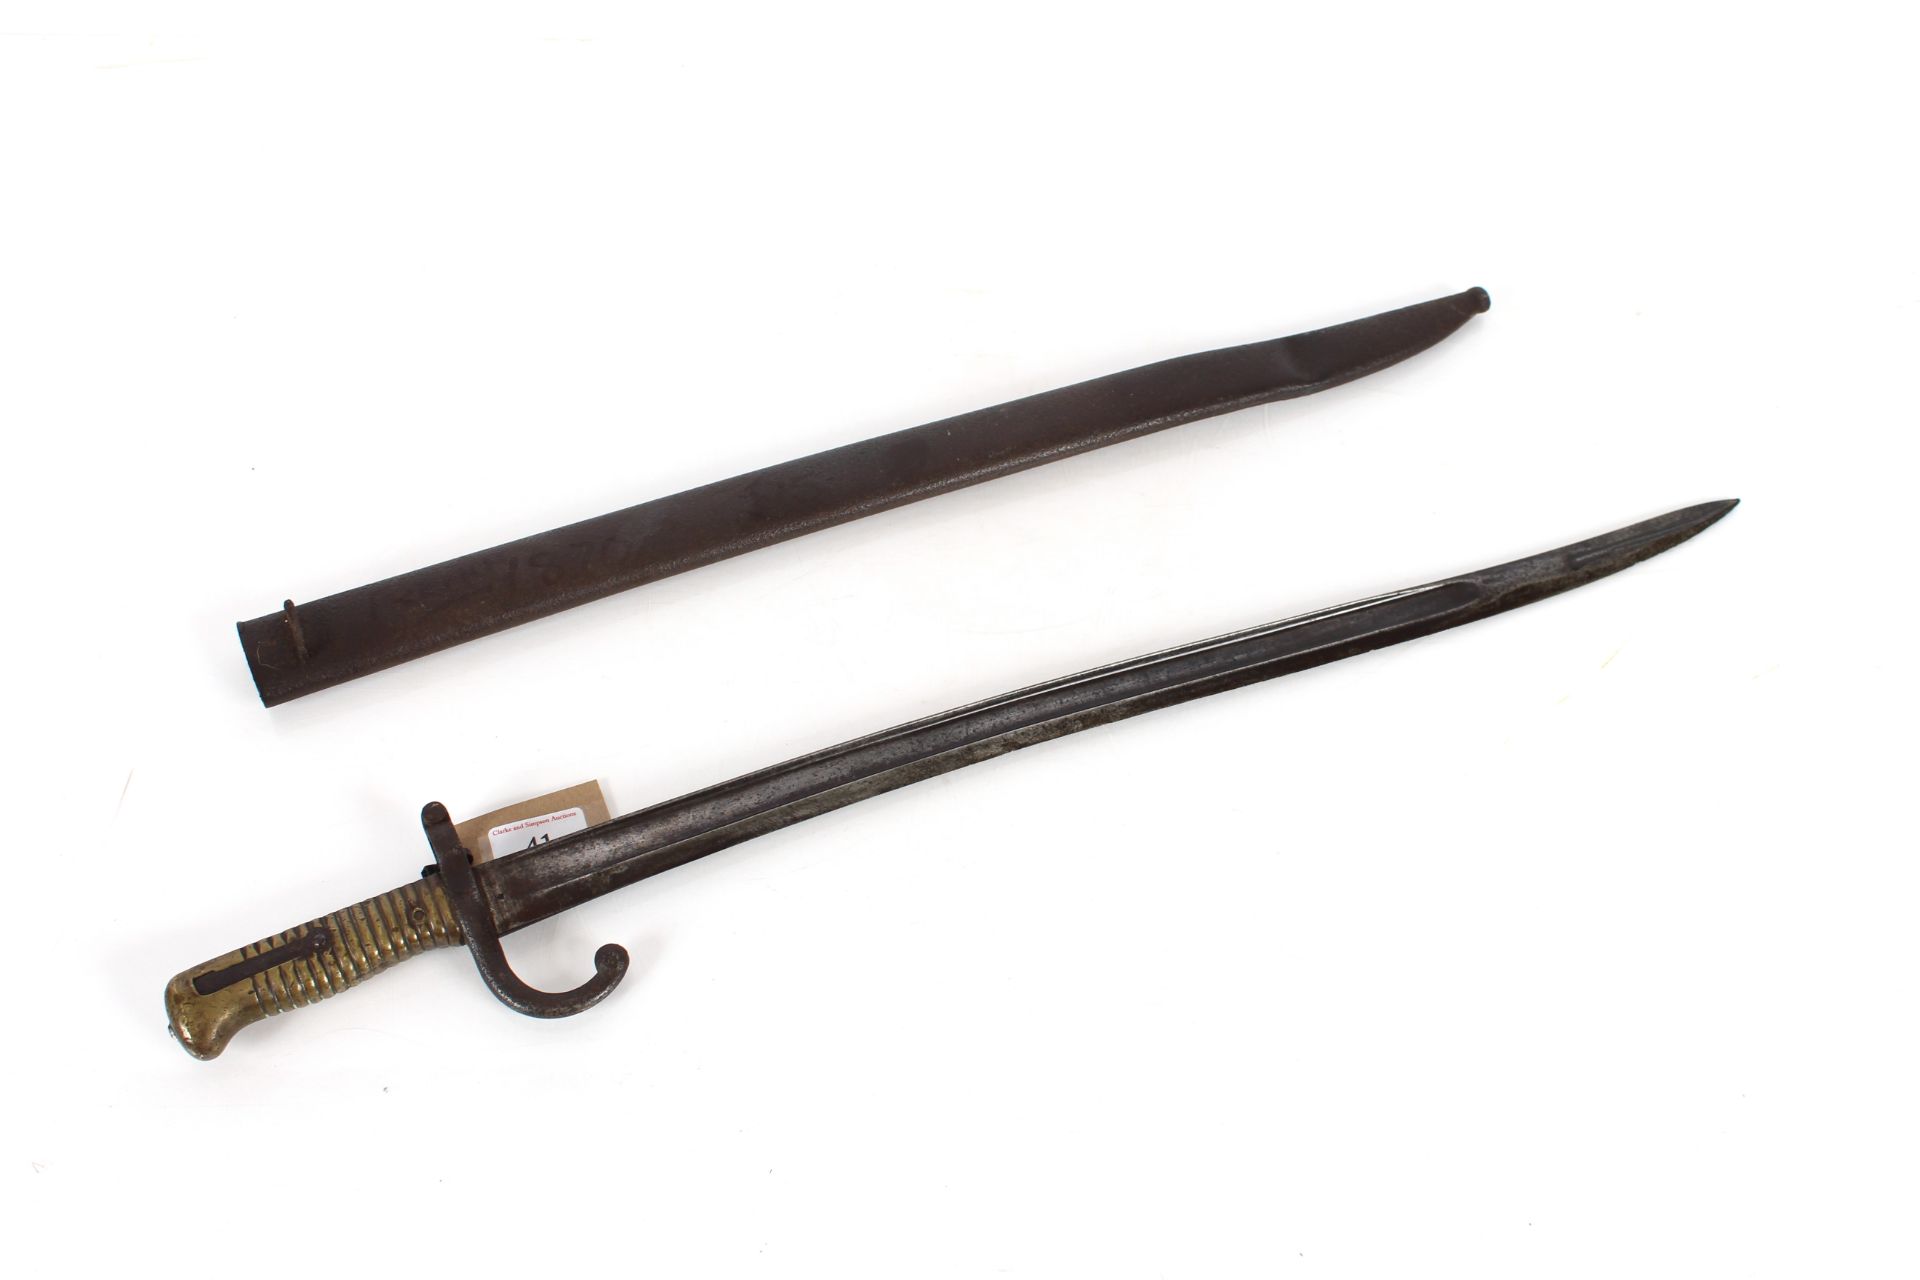 A French model 1866 bayonet with scabbard